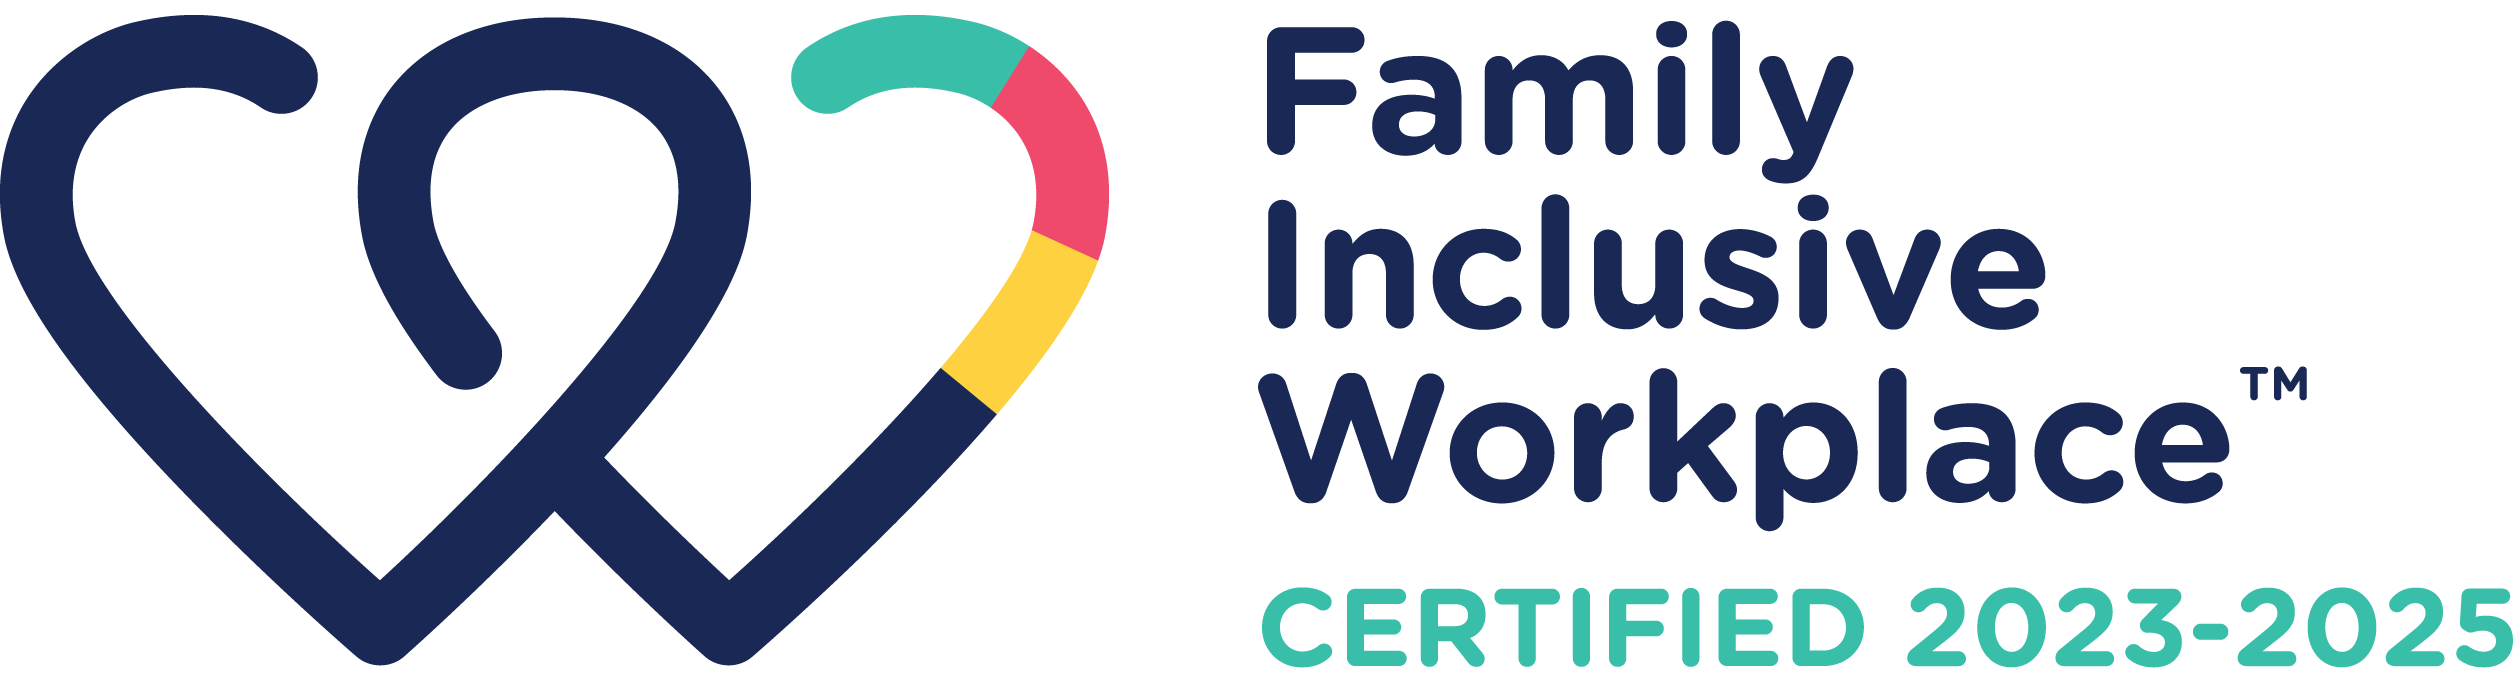 Family Inclusive Workplace certified 2022/2023 logo